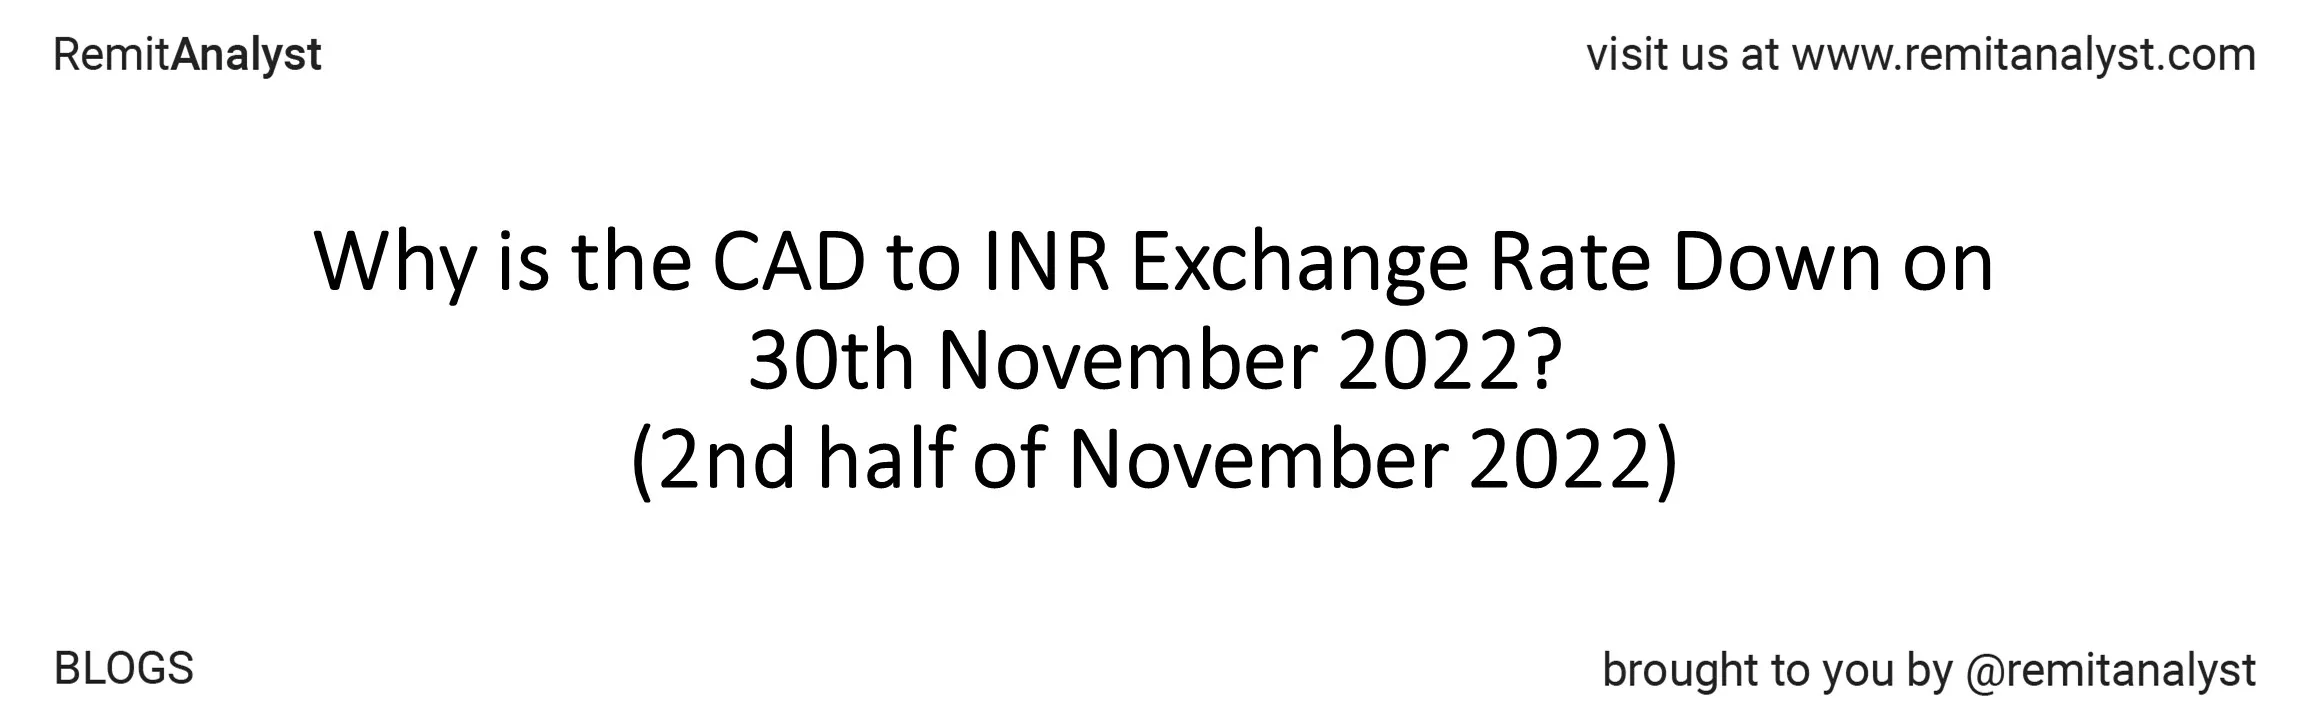 cad-to-inr-exchange-rate-from-16-nov-2022-to-30-nov-2022-title